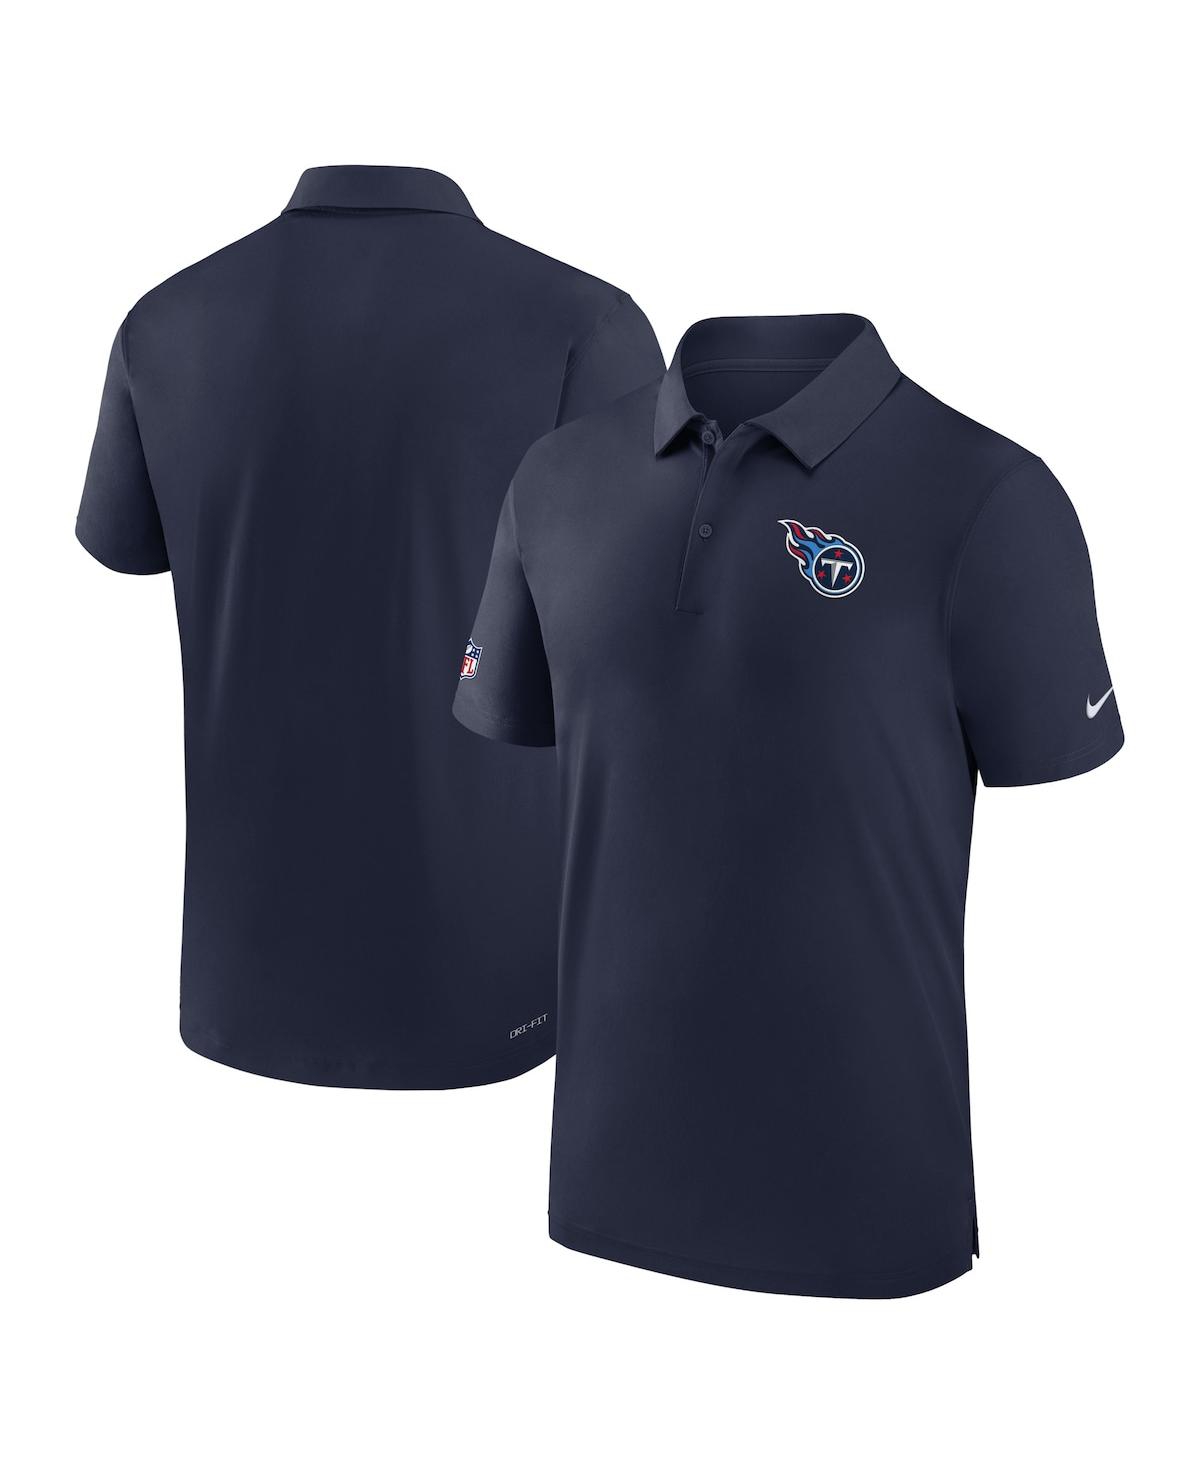 Nike Men's  Navy Tennessee Titans Sideline Coaches Performance Polo Shirt